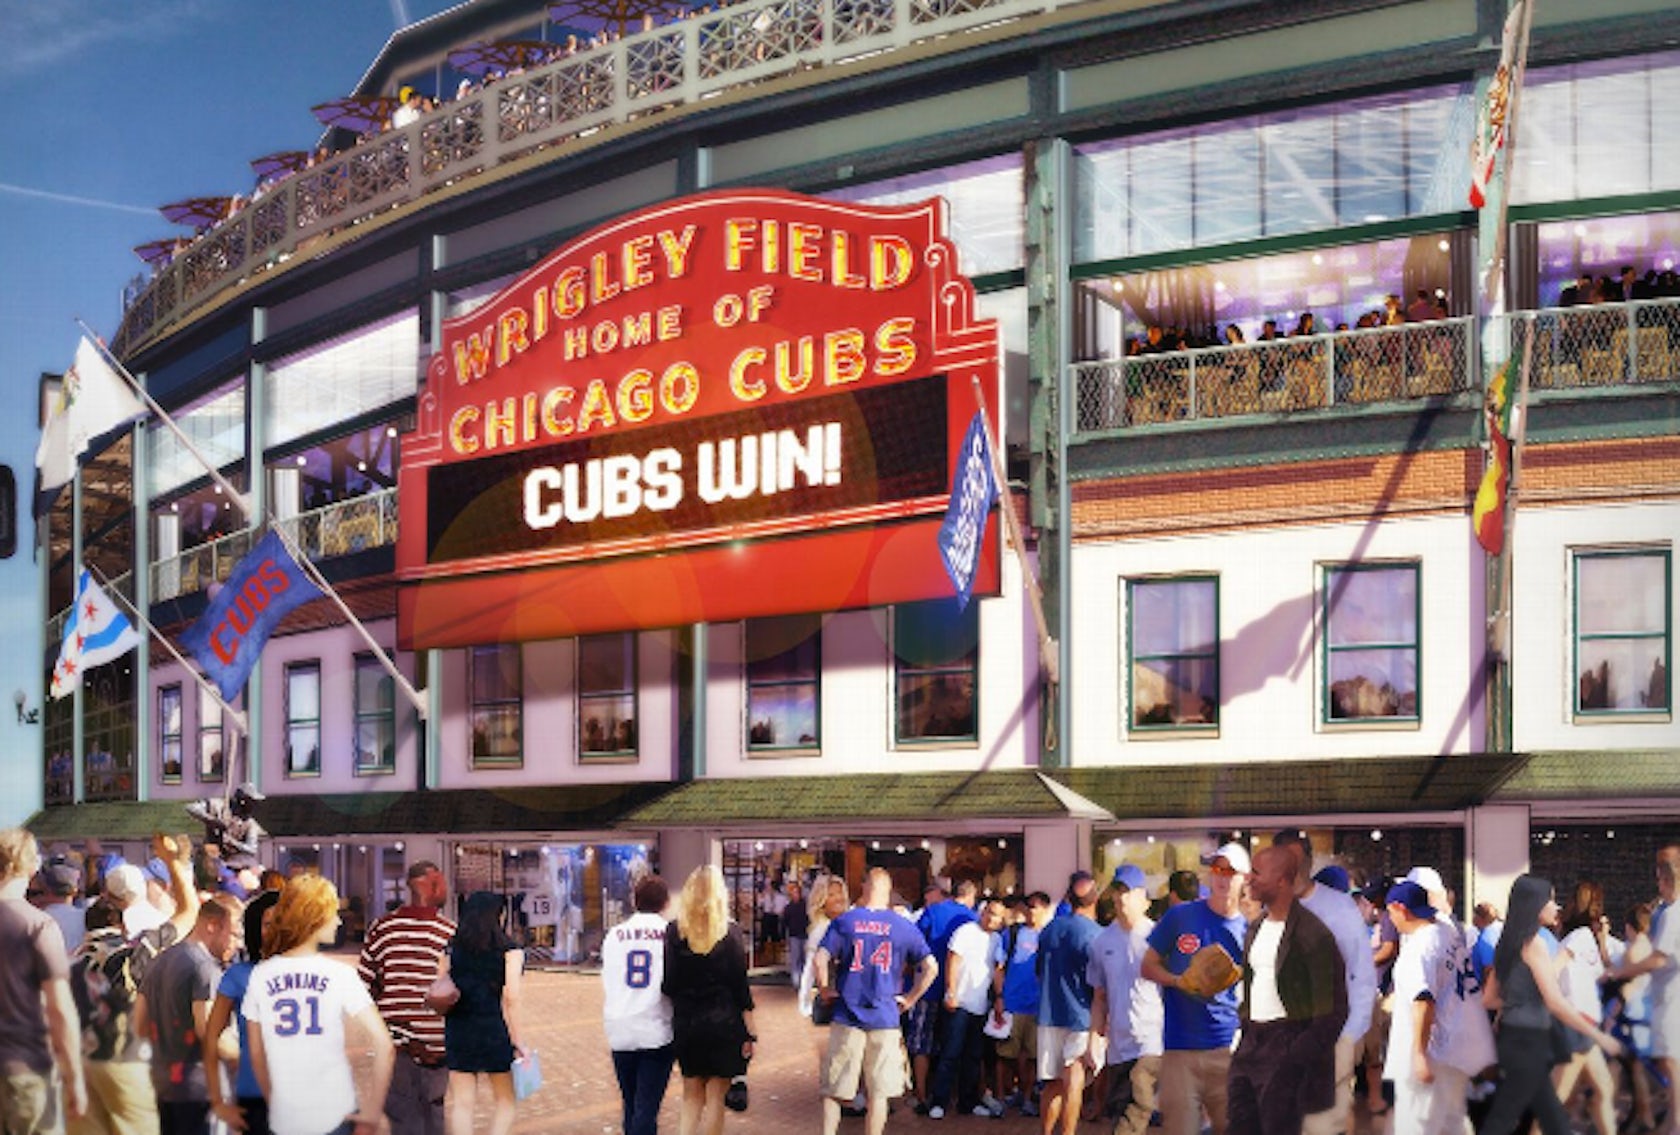 A Look At Wrigley Field 100 Years Ago and Today - Curbed Chicago